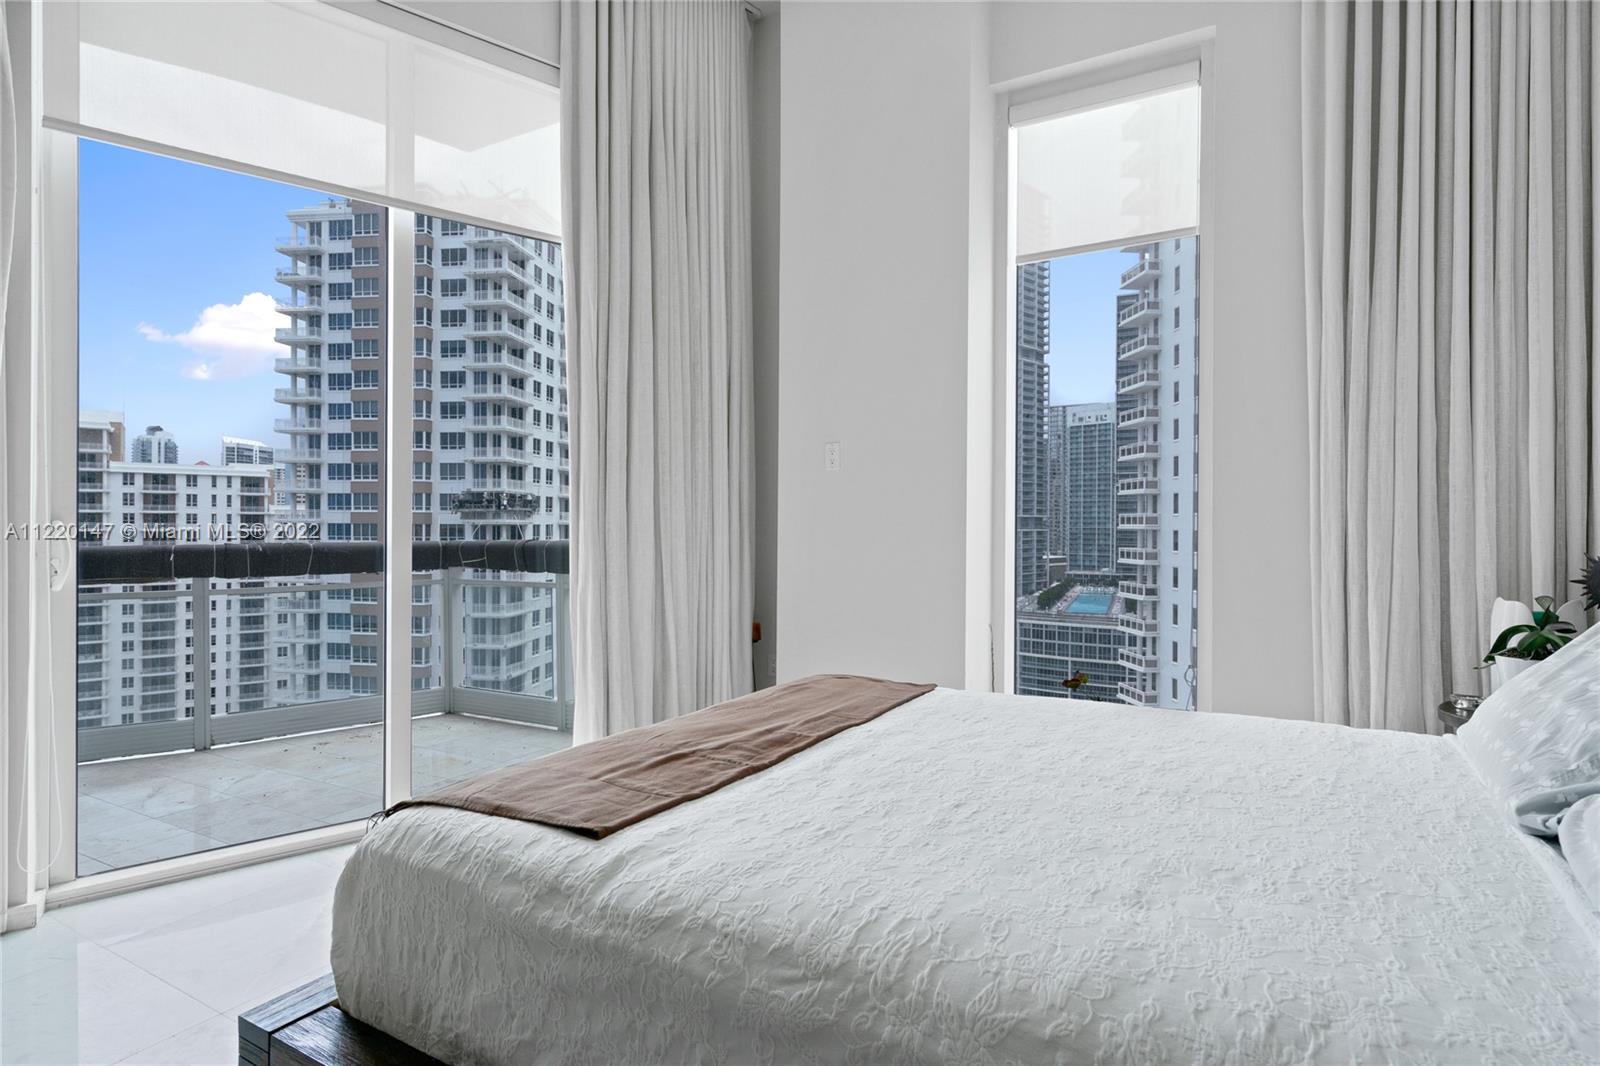 This 2/2.5 unit features a private elevator, 12-foot-high ceilings with floor-to-ceiling windows, Italian-designer wood cabinetry, granite countertops, best-in-class kitchen appliances by Miele and SubZero and spacious balcony to enjoy partial water & city views. Asia Brickell Key offers a number of upscale amenities for its residents, including a high-tech fitness center, a full-service concierge, a swimming pool, a hot tub, a tennis court, and 24-hour valet parking service. Additionally, a number of restaurants and a grocery store are within walking distance of Asia Brickell Key.